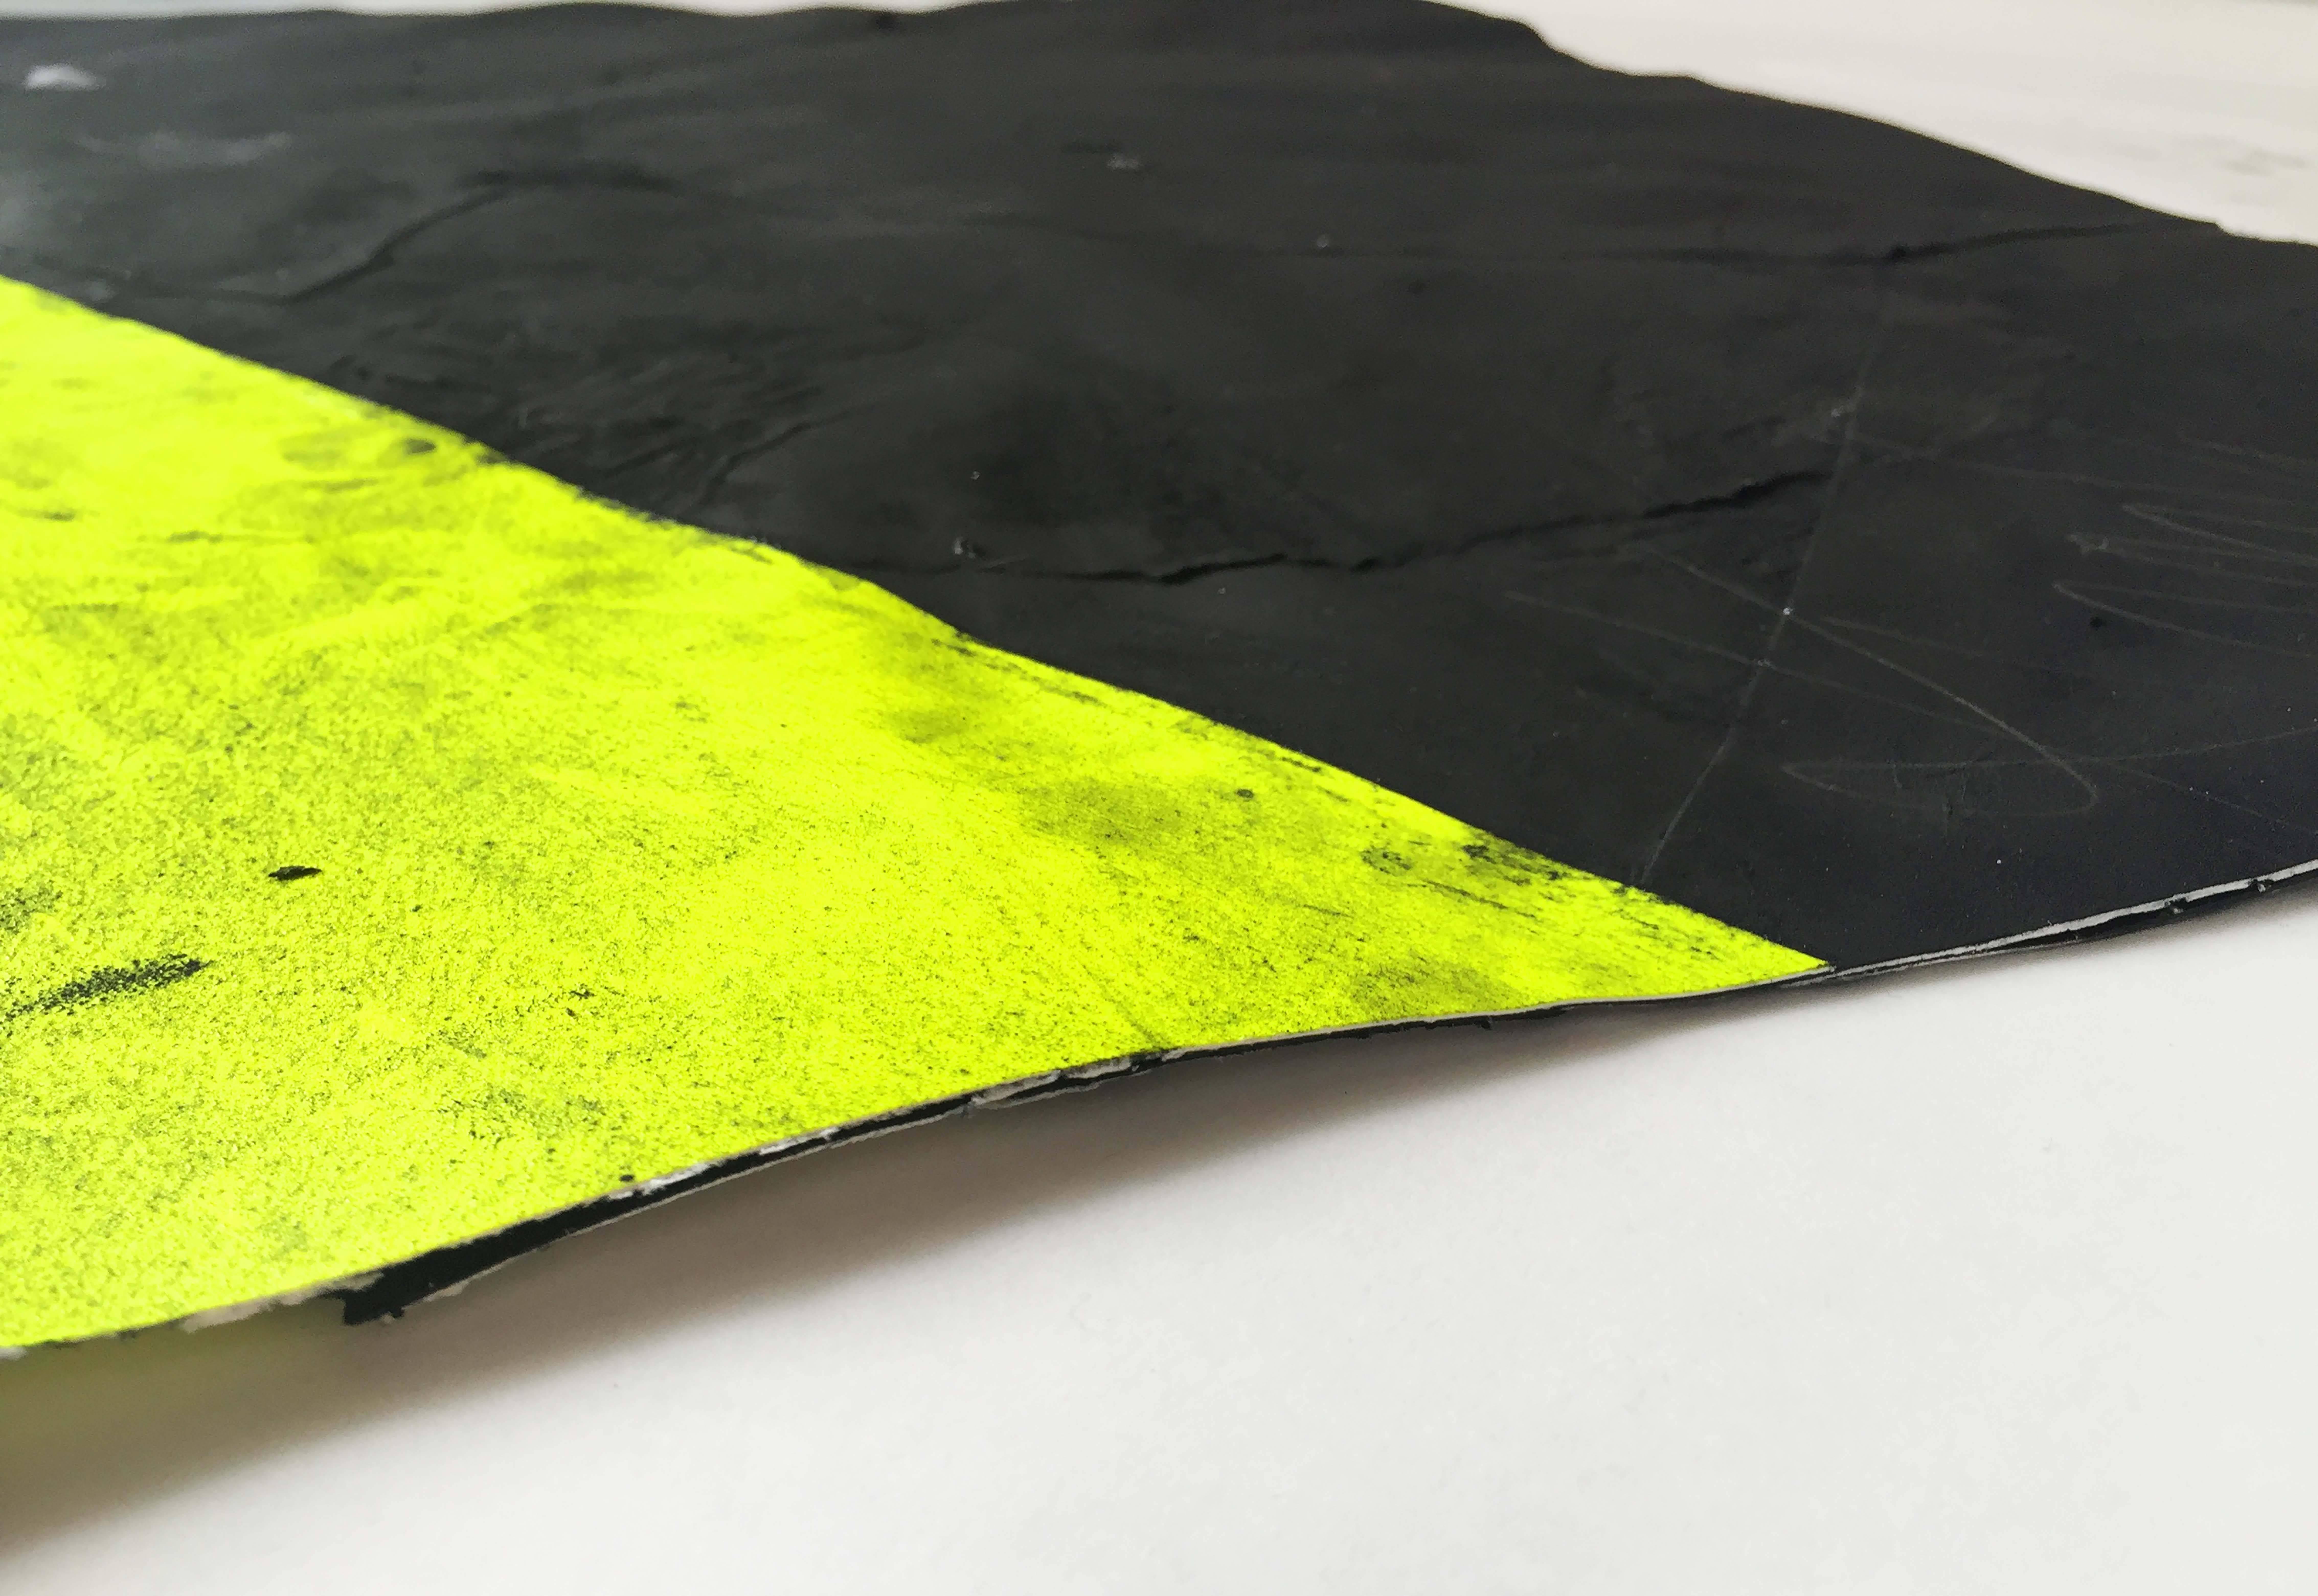 from Afghan Kite series. neon yellow against pure black, creating a bold composition 

Chicago painter Wesley Kimler once referred to himself as the 